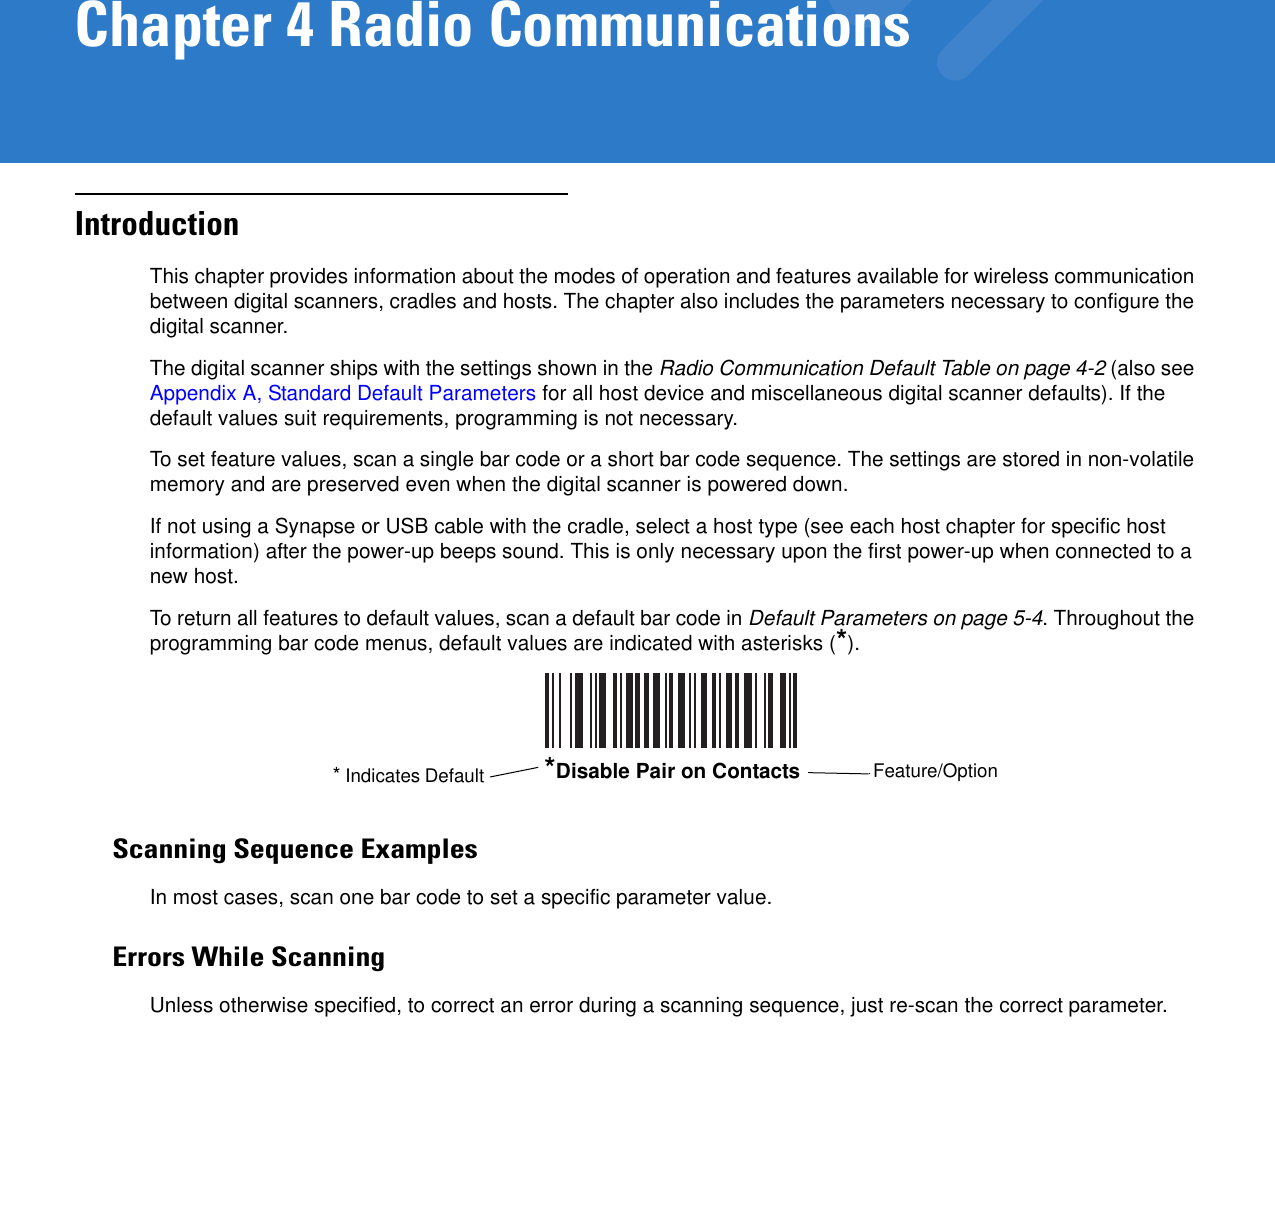 Chapter 4 Radio CommunicationsIntroductionThis chapter provides information about the modes of operation and features available for wireless communication between digital scanners, cradles and hosts. The chapter also includes the parameters necessary to configure the digital scanner.The digital scanner ships with the settings shown in the Radio Communication Default Table on page 4-2 (also see Appendix A, Standard Default Parameters for all host device and miscellaneous digital scanner defaults). If the default values suit requirements, programming is not necessary. To set feature values, scan a single bar code or a short bar code sequence. The settings are stored in non-volatile memory and are preserved even when the digital scanner is powered down.If not using a Synapse or USB cable with the cradle, select a host type (see each host chapter for specific host information) after the power-up beeps sound. This is only necessary upon the first power-up when connected to a new host.To return all features to default values, scan a default bar code in Default Parameters on page 5-4. Throughout the programming bar code menus, default values are indicated with asterisks (*).Scanning Sequence ExamplesIn most cases, scan one bar code to set a specific parameter value.Errors While ScanningUnless otherwise specified, to correct an error during a scanning sequence, just re-scan the correct parameter.*Disable Pair on Contacts Feature/Option* Indicates Default